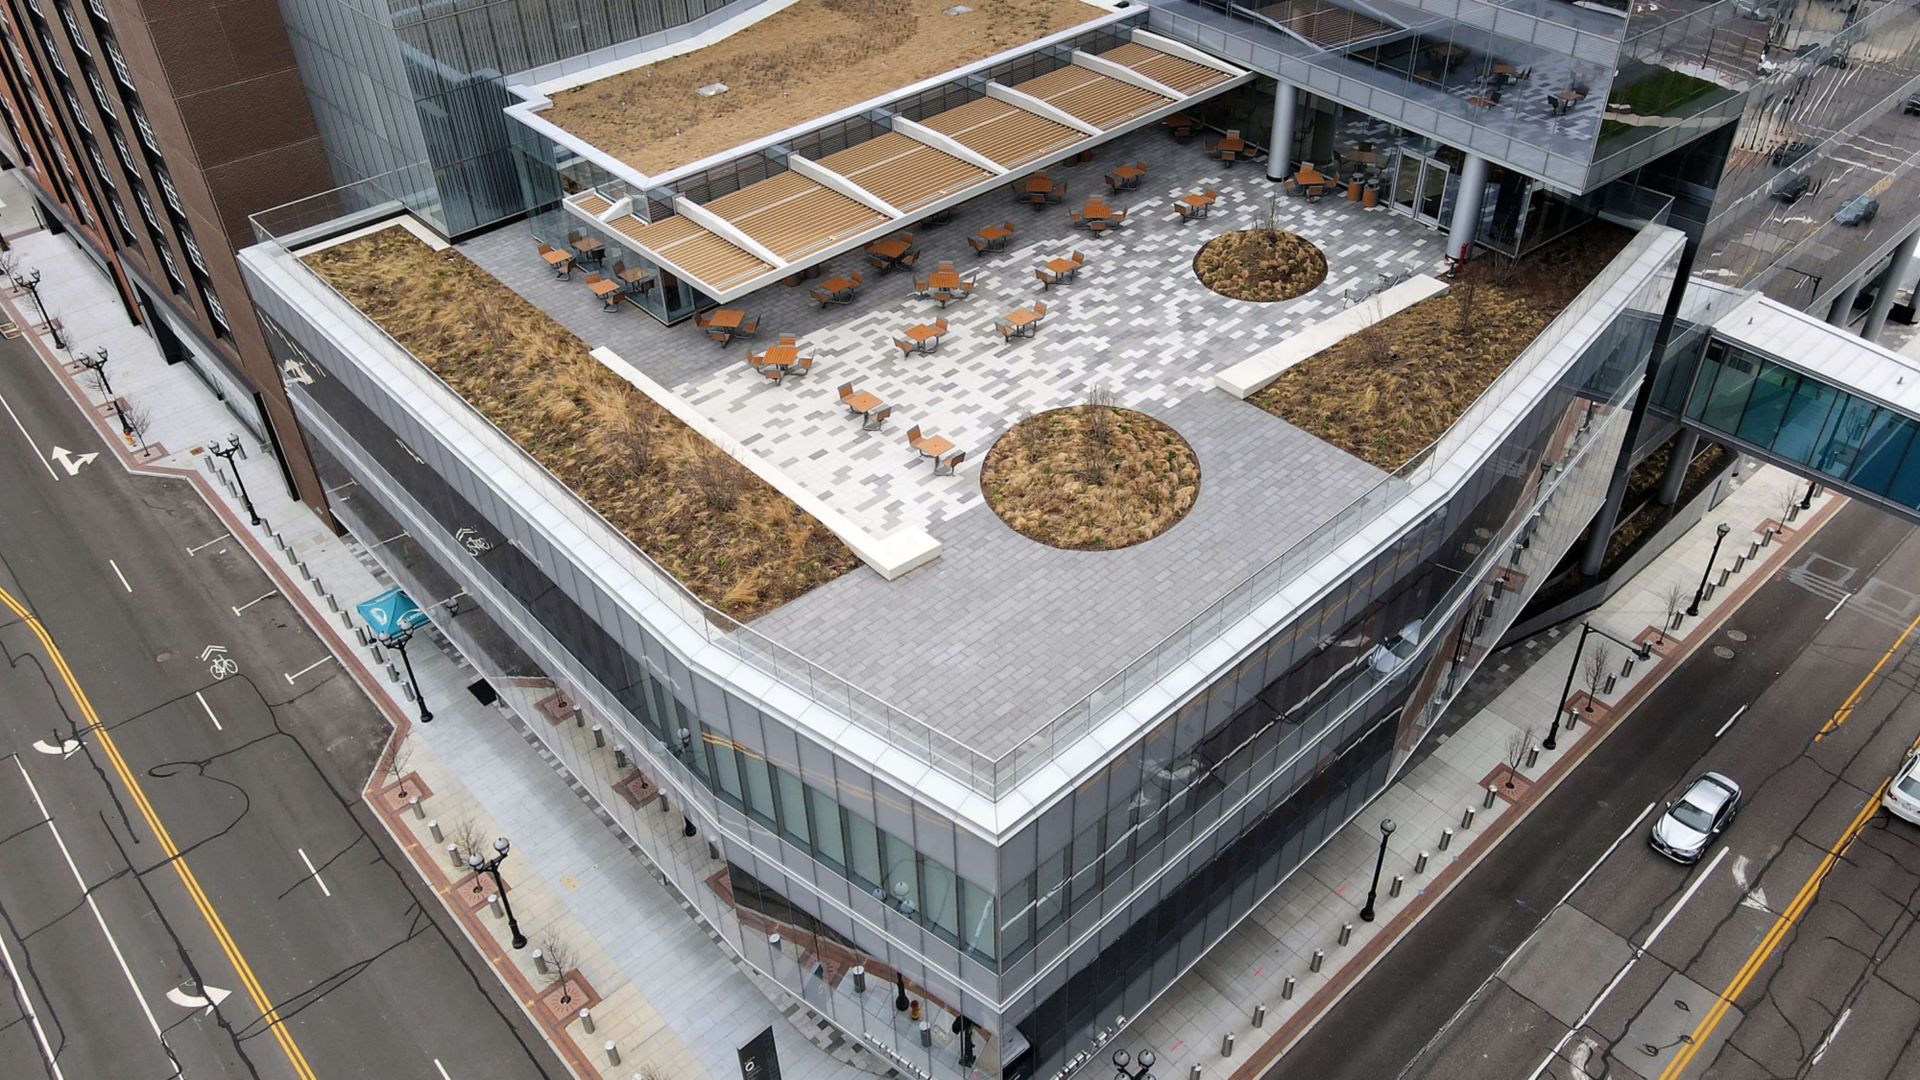 Aerial view of the lower Centene Plaza building with a green roof and sitting area for people to enjoy